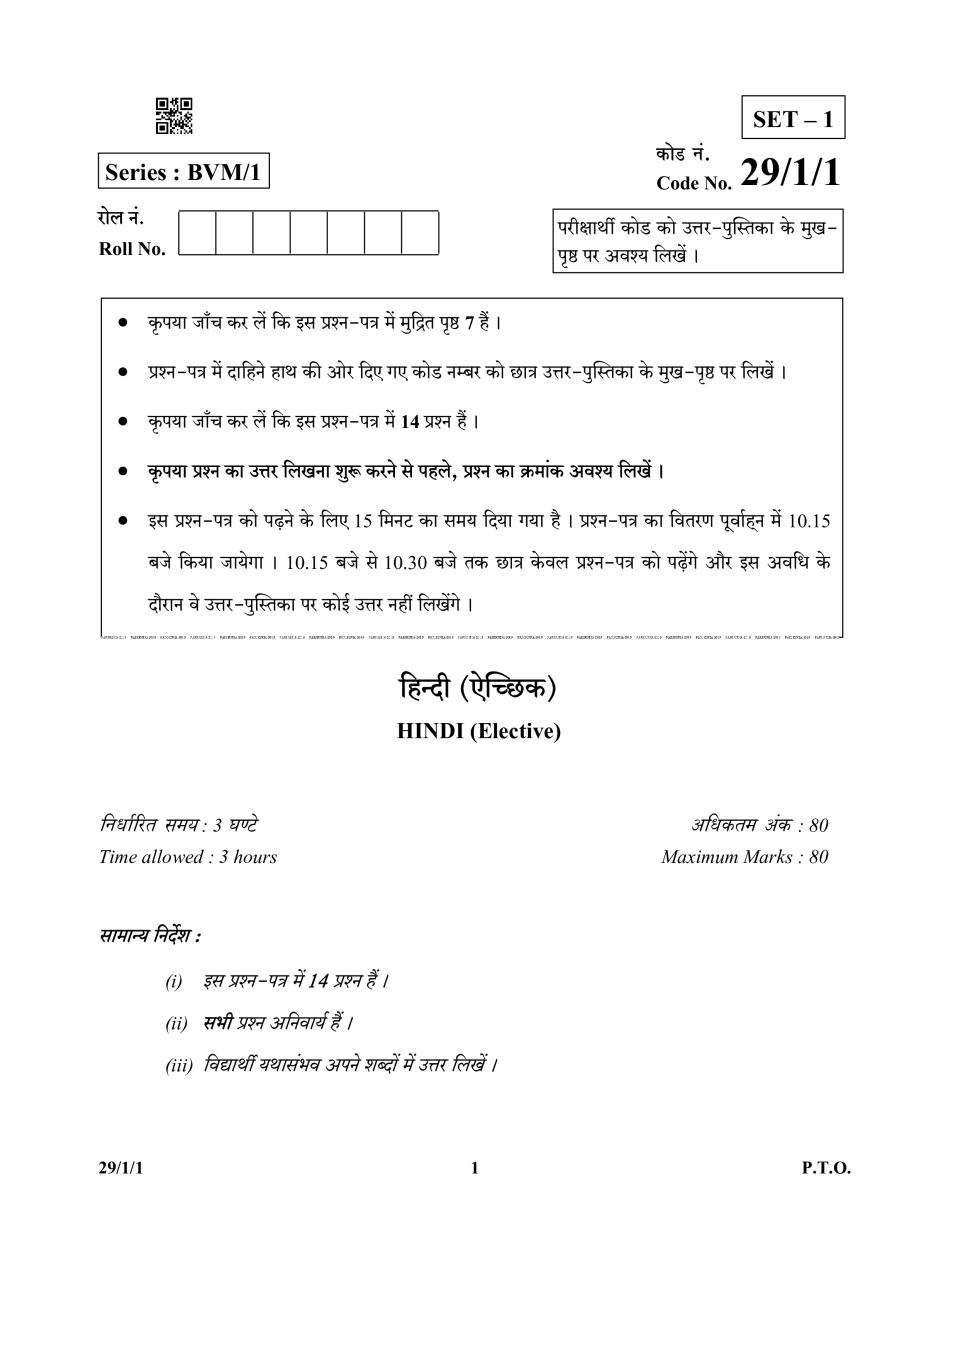 CBSE Class 12 Hindi Elective Question Paper 2019 Set 1 - Page 1